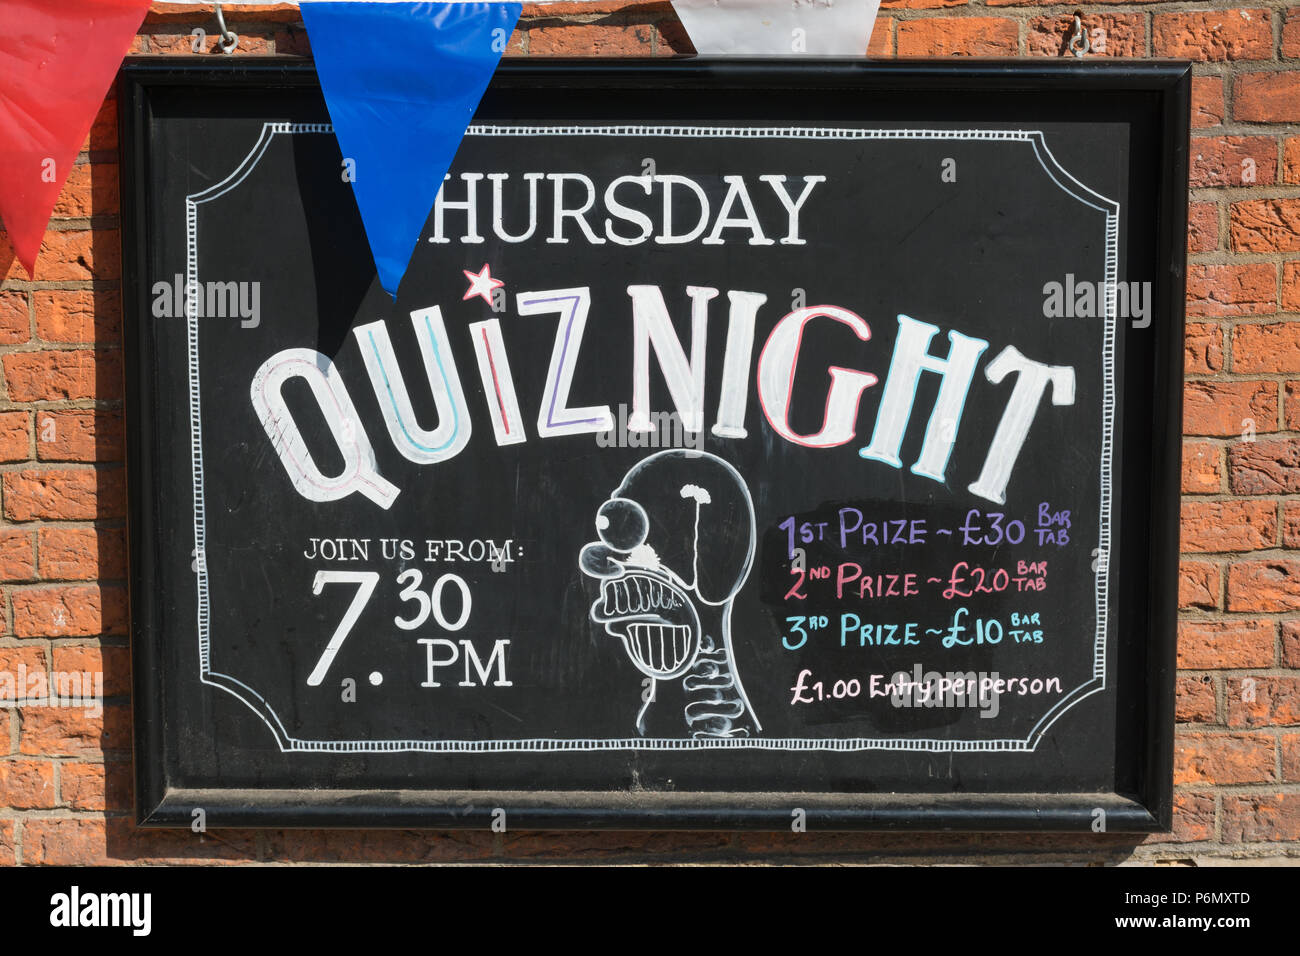 Notice giving information about a weekly Thursday quiz night on the exterior of a pub in Guildford, Surrey, UK Stock Photo